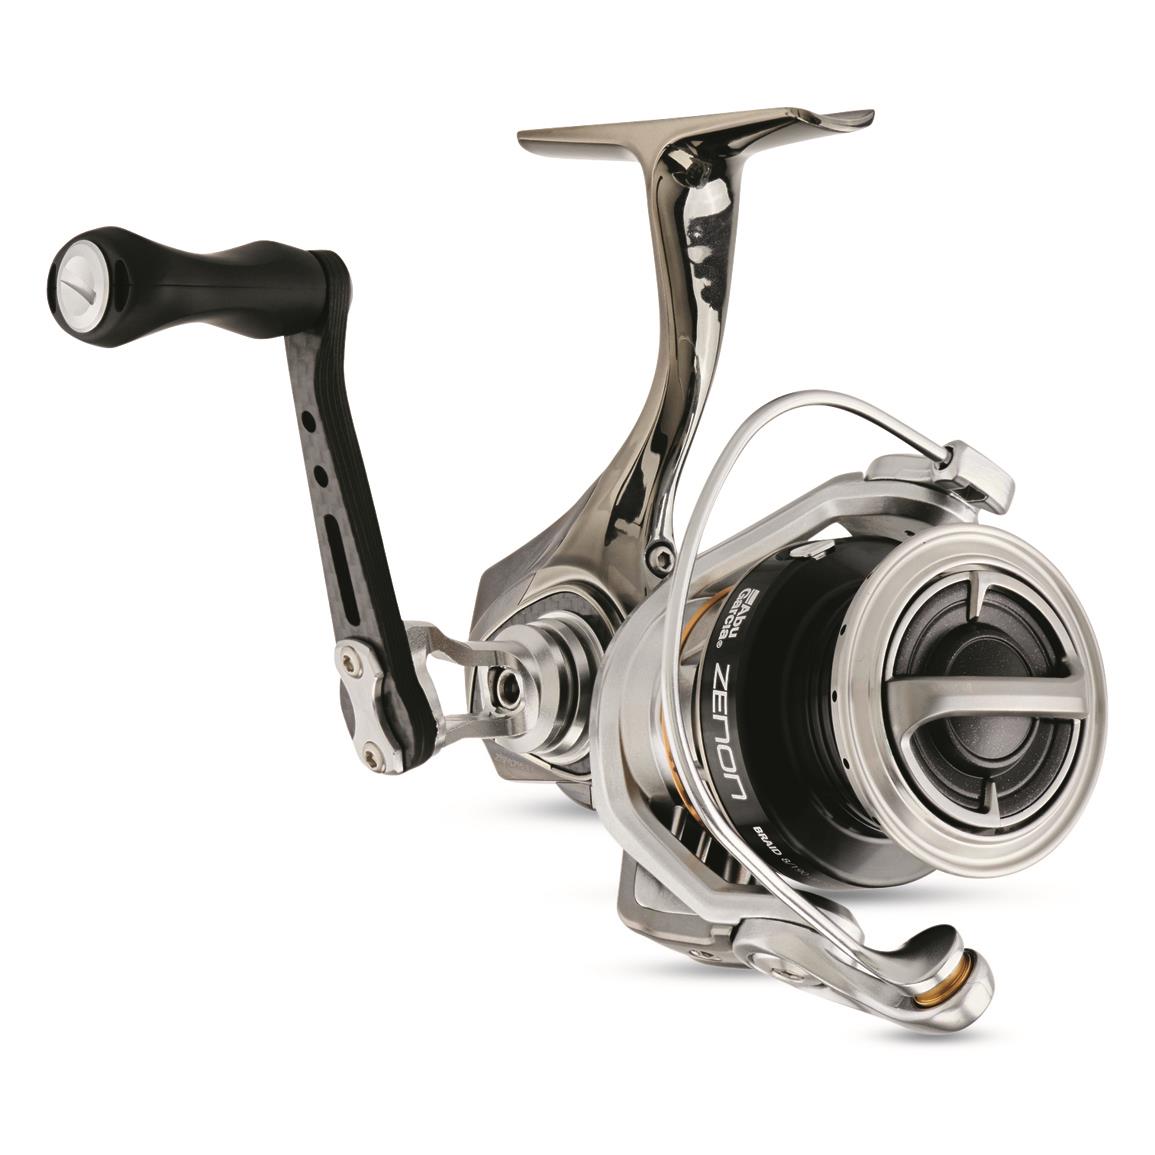 Mr. Crappie Crappie Thunder Pre-spooled Solo Jigging Reel - 732868,  Spinning Reels at Sportsman's Guide